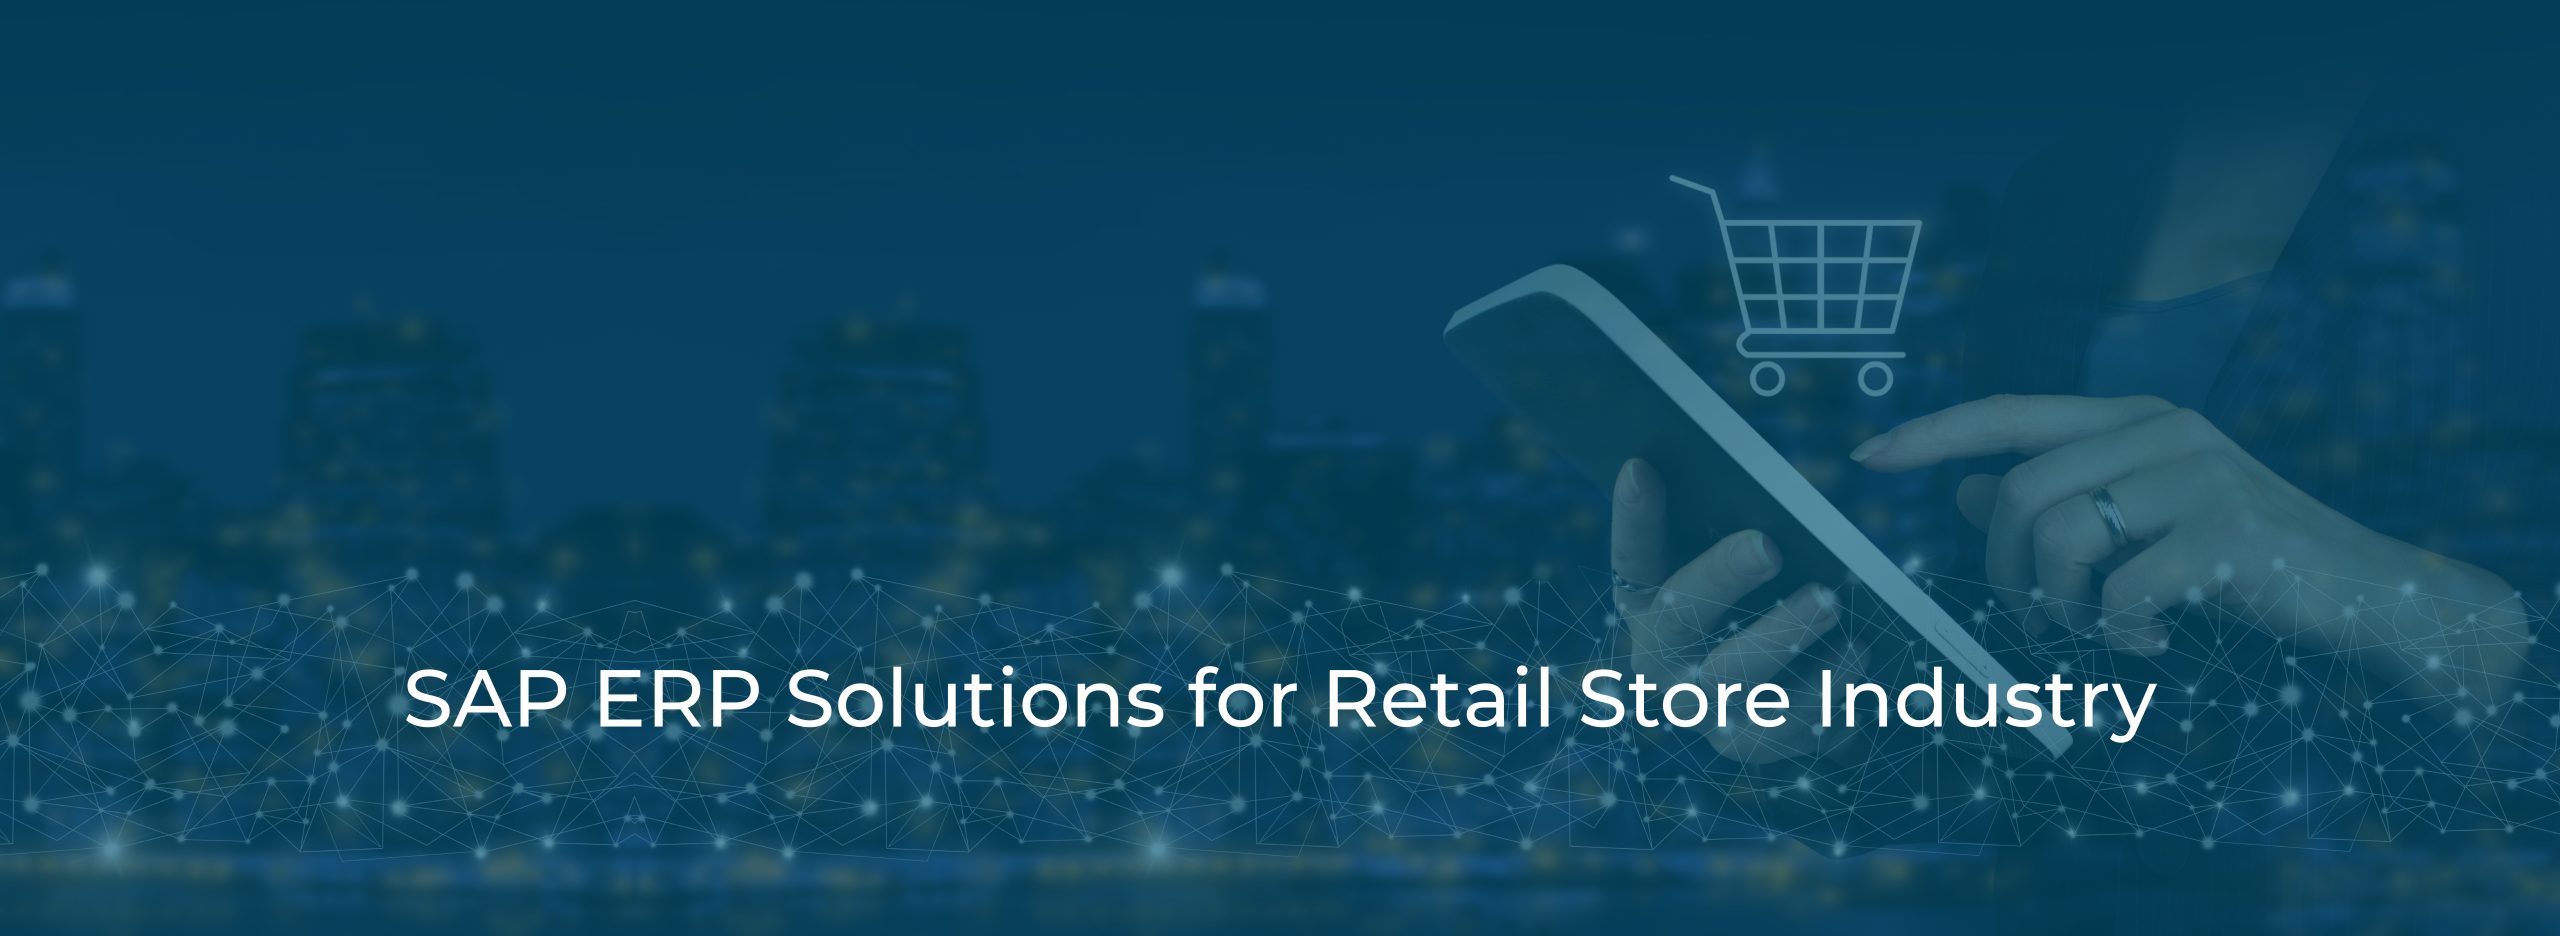 SAP ERP Solutions for Retail Store Industry